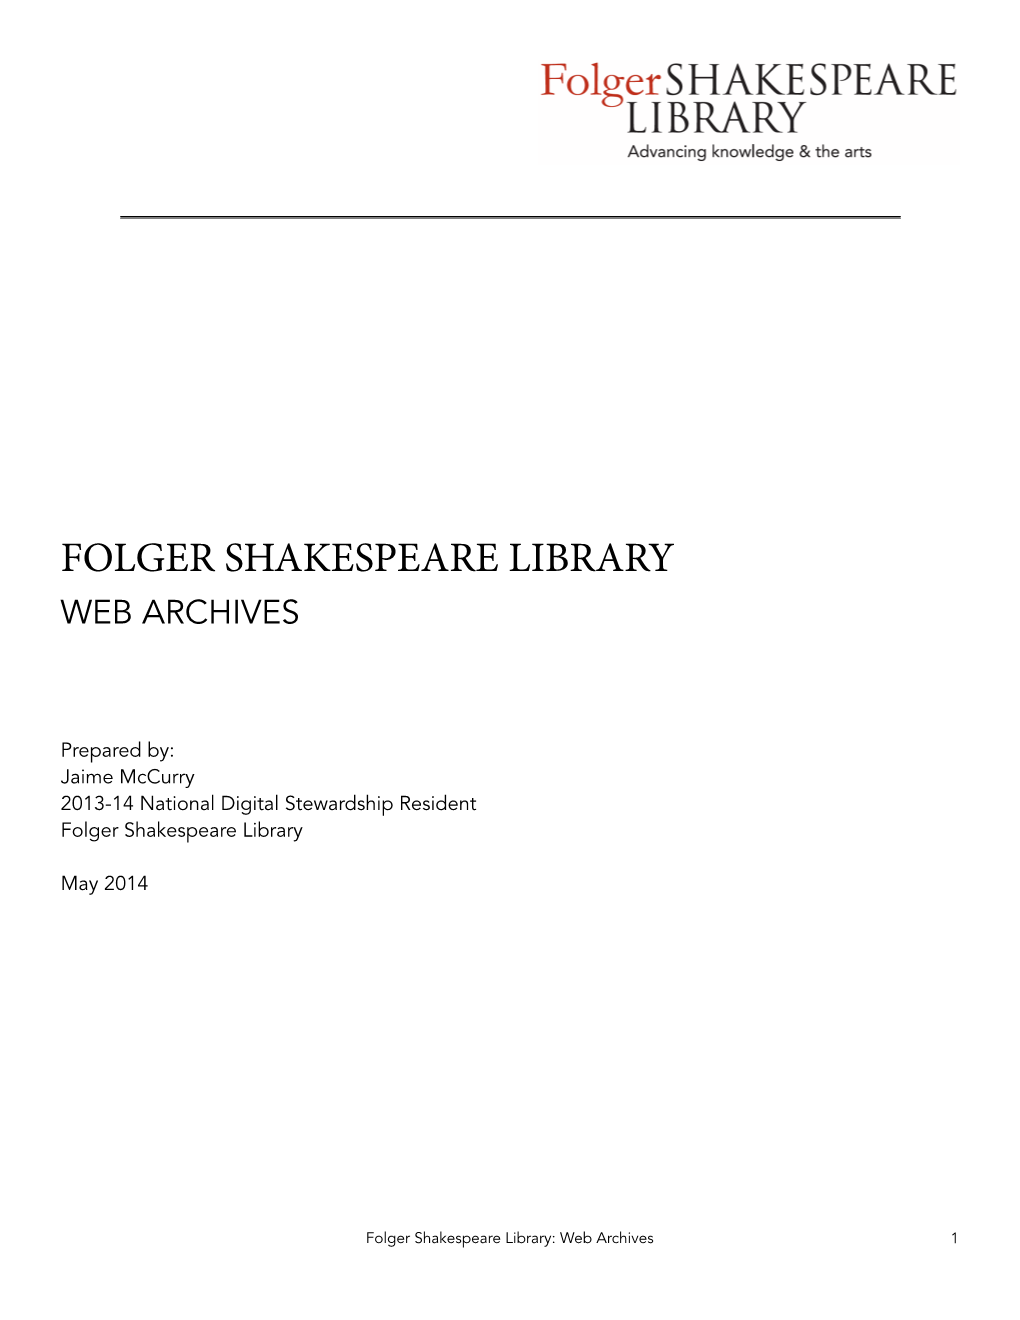 May 2014 Folger Shakespeare Library Web Archives Summary Report